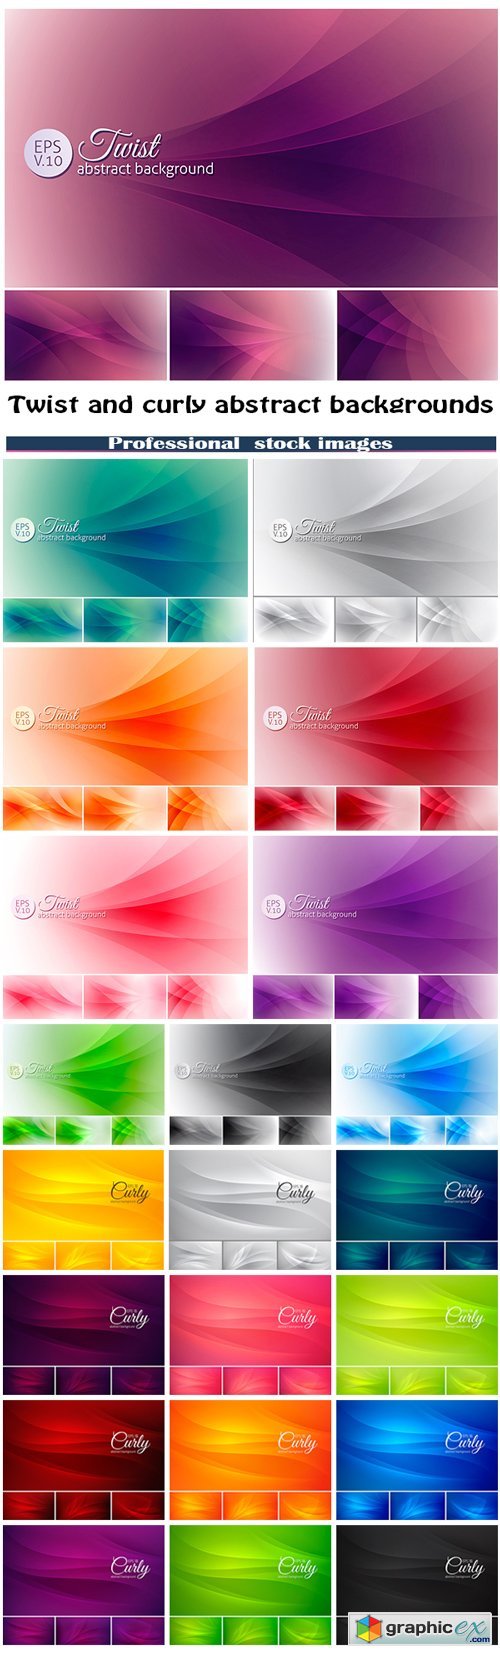 Twist and curly abstract background